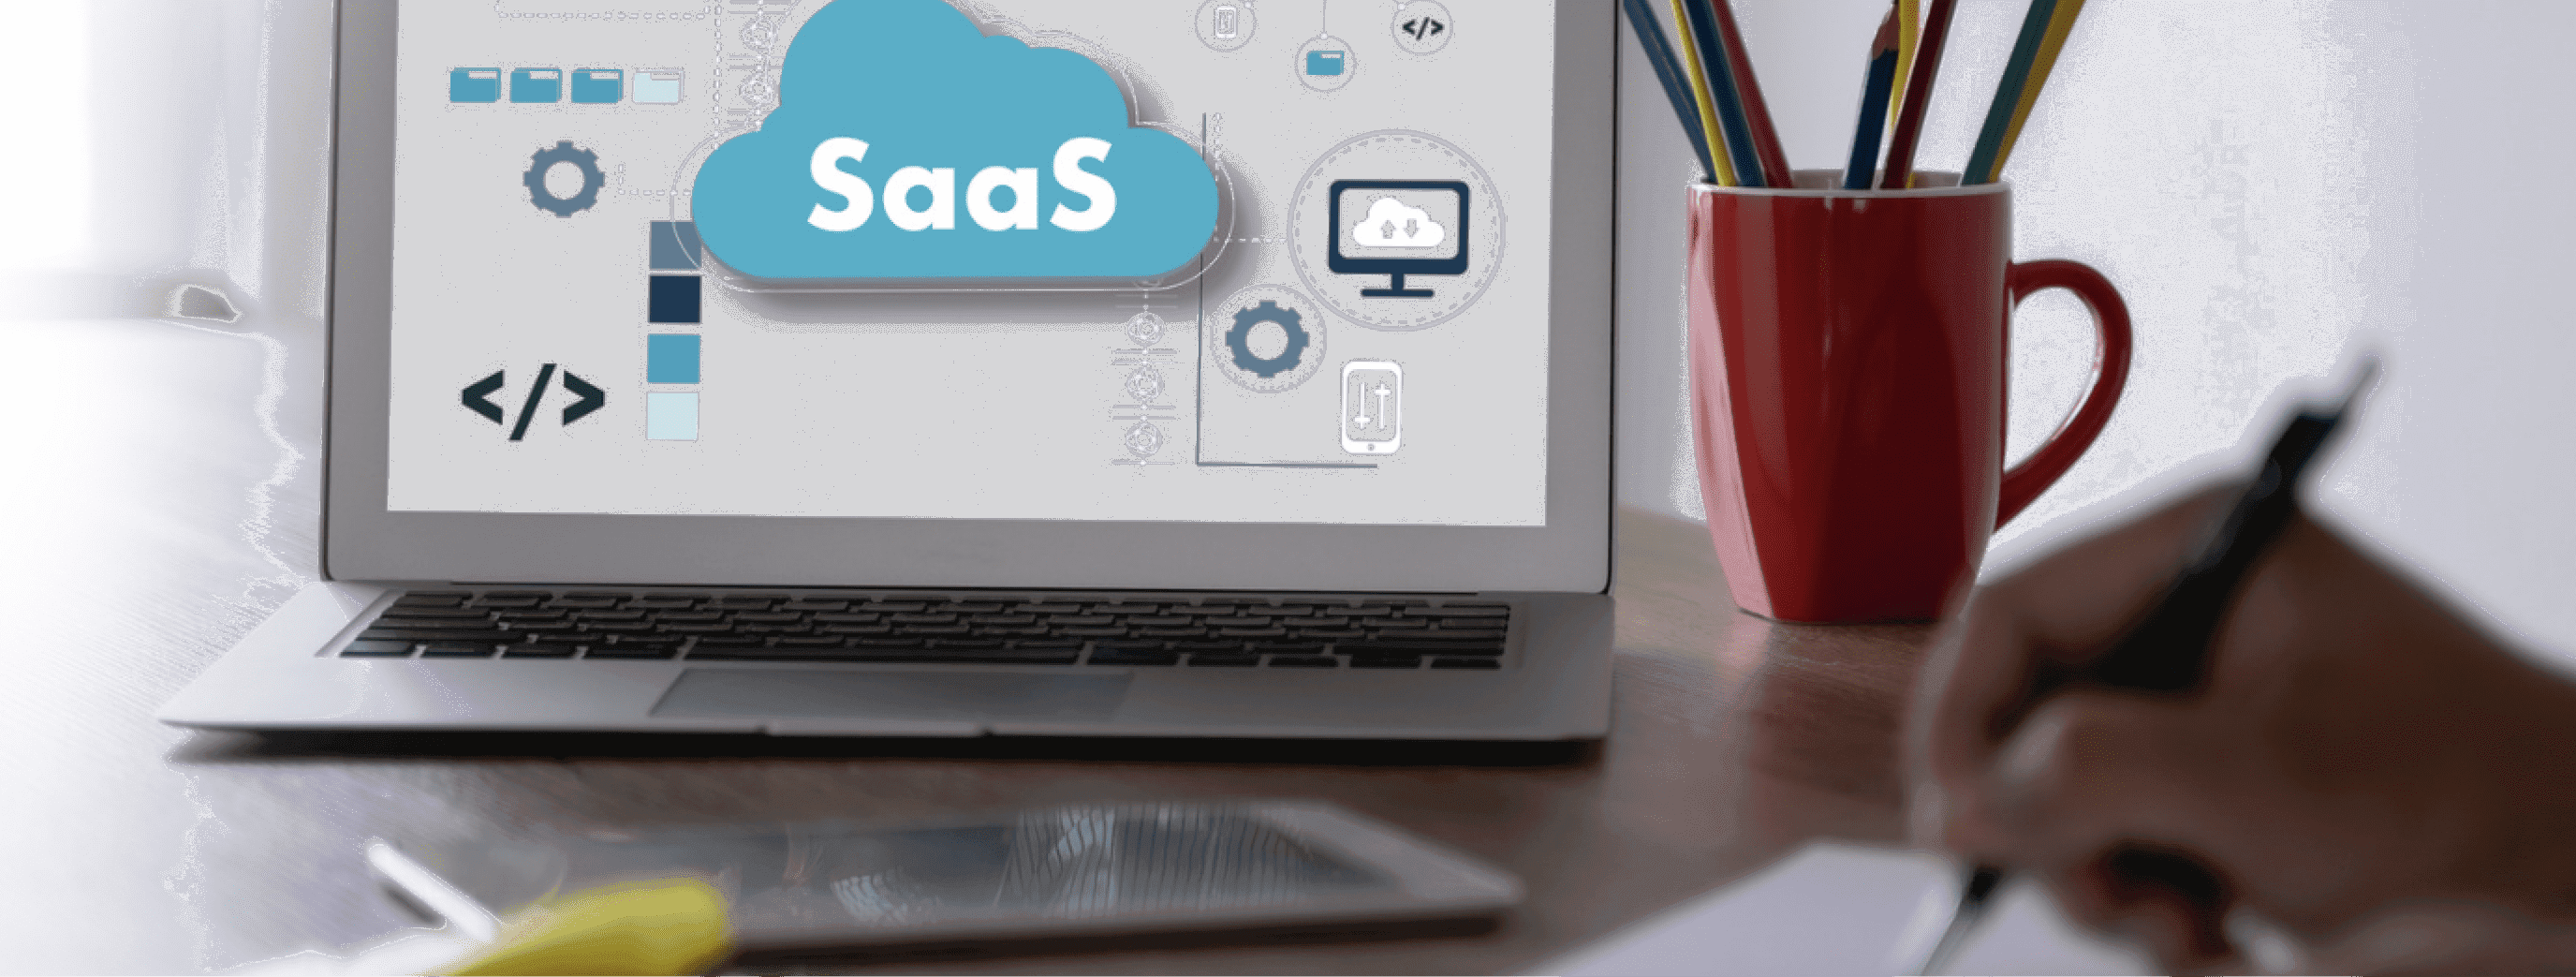 Launch you SaaS application